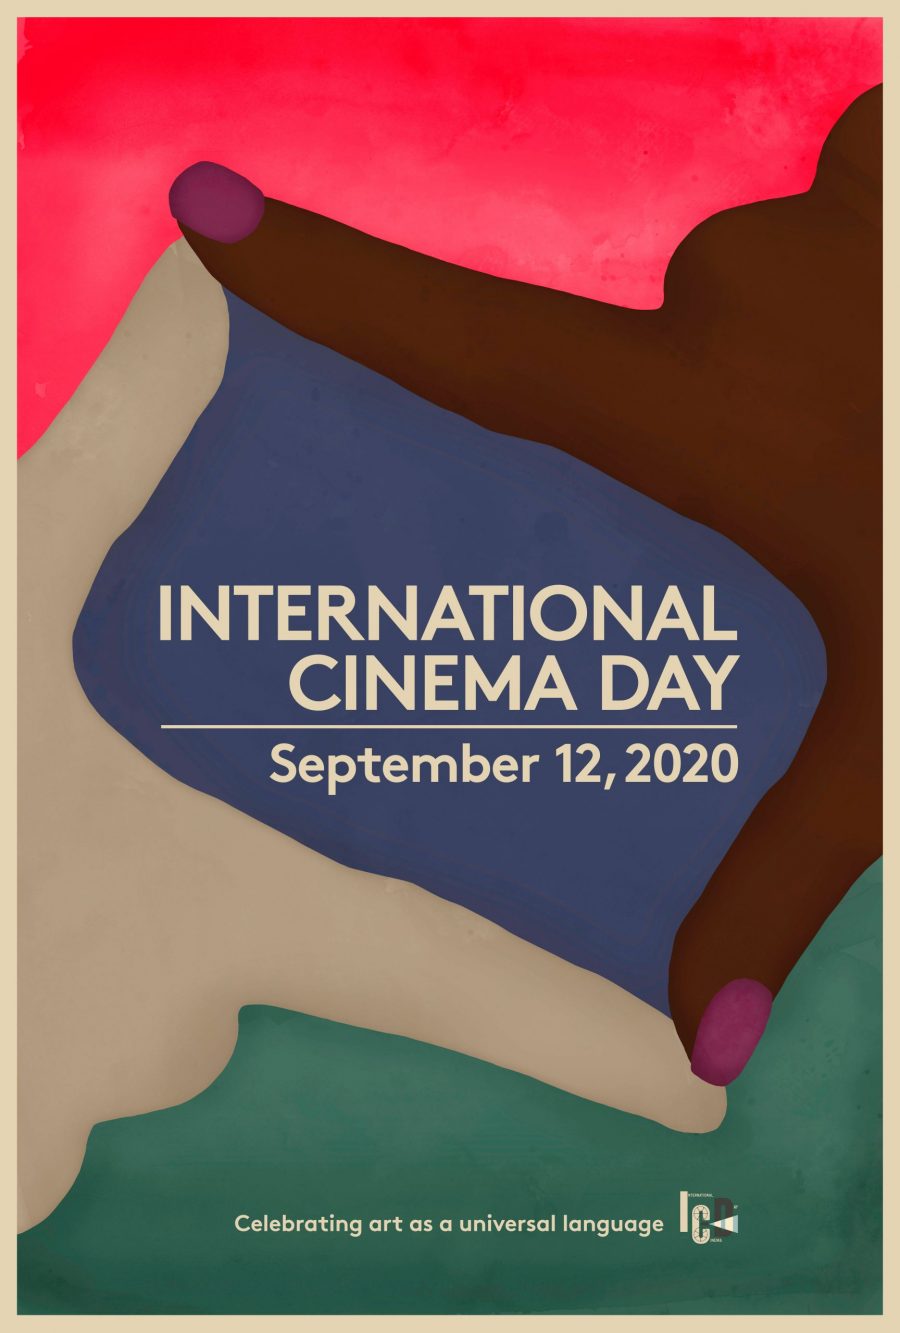 On International Cinema Day, support a movie theatre you love